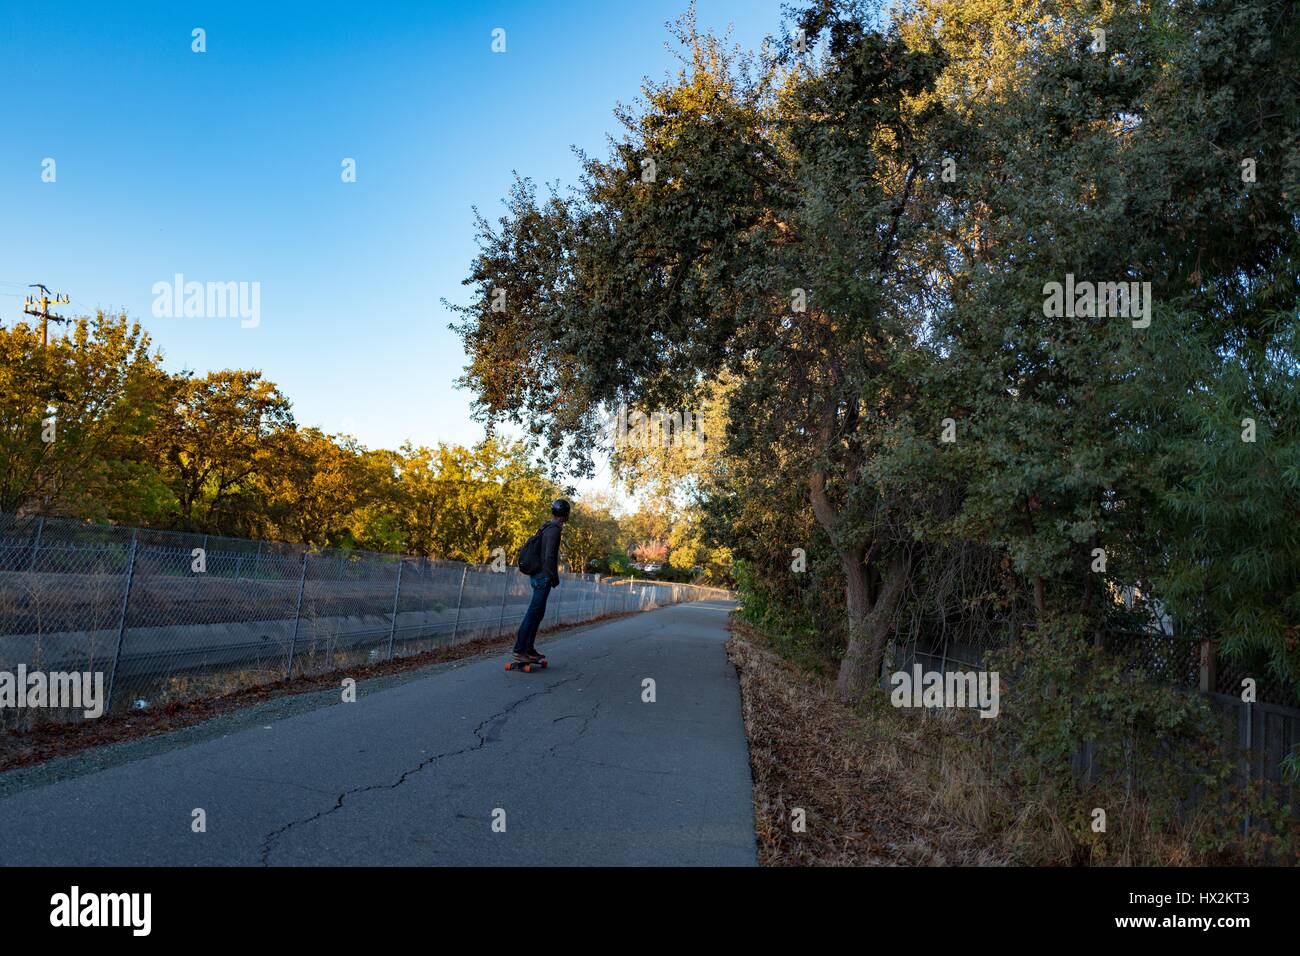 A teenager wearing a helmet rides a skateboard down a path on the Contra Costa Canal Trail, Walnut Creek, California, October 19, 2016 Stock Photo